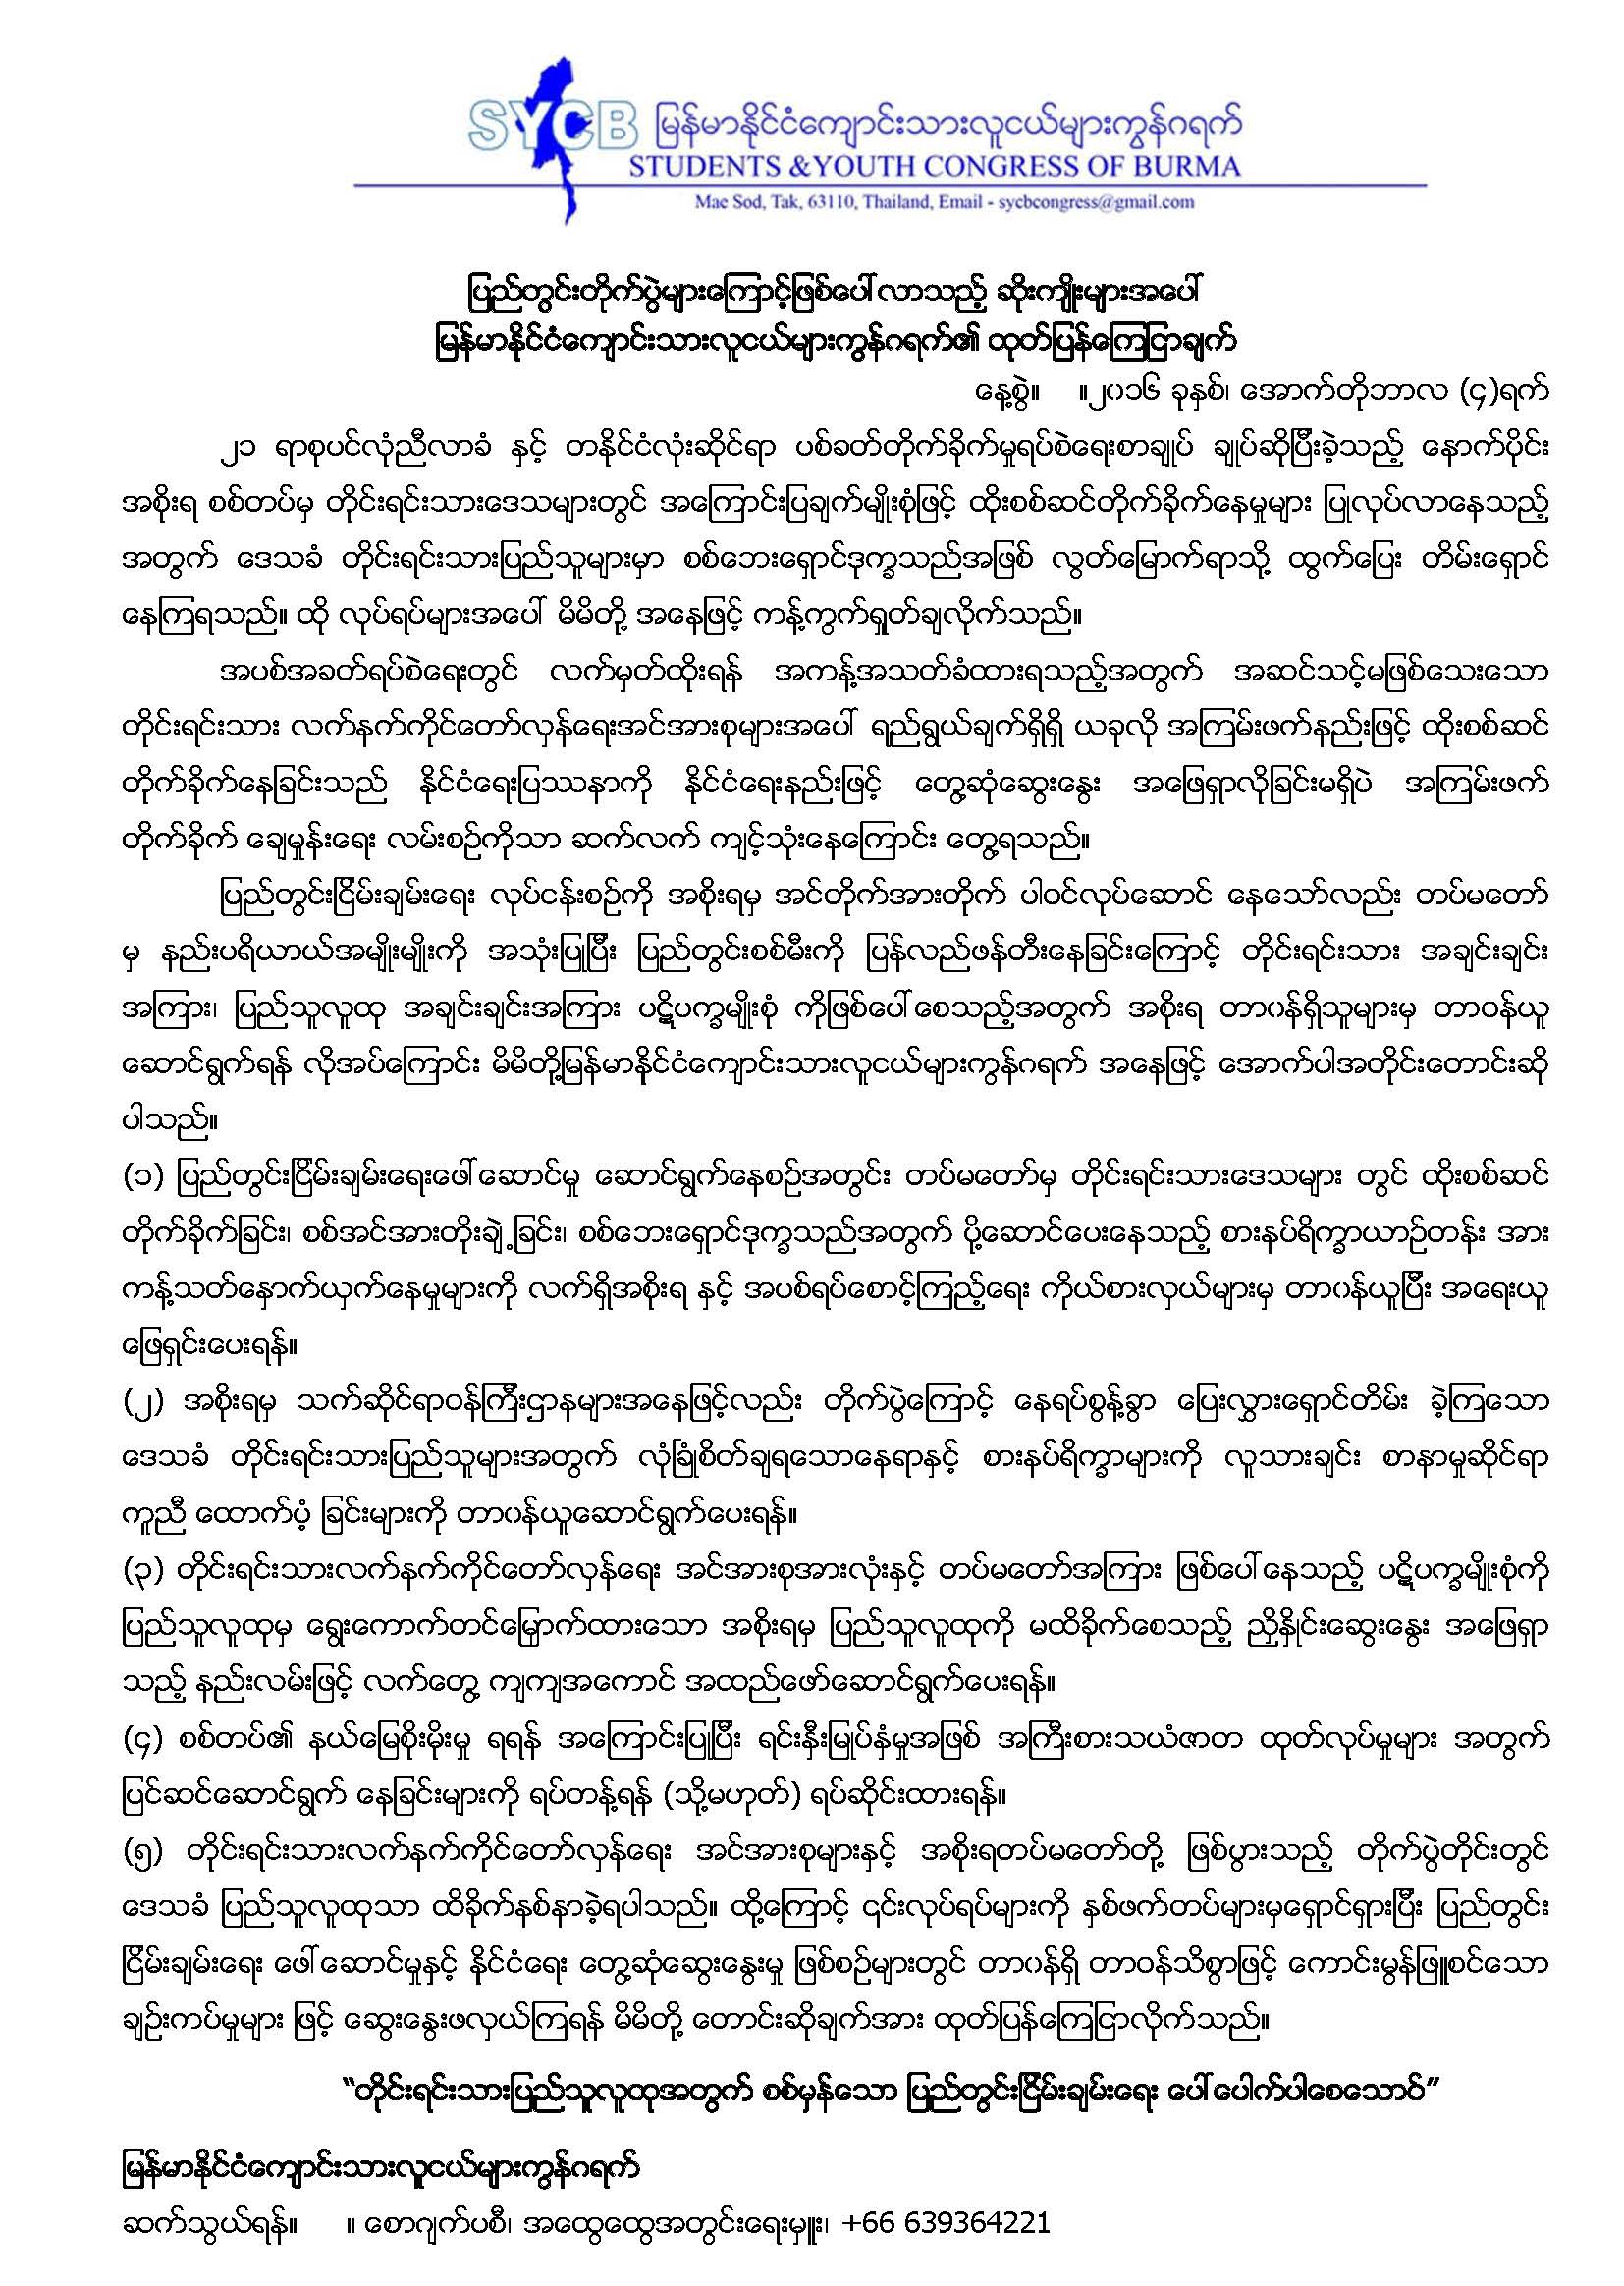 sycb-statement-on-effected-events-by-civil-wars-in-burma-oct-2016_2